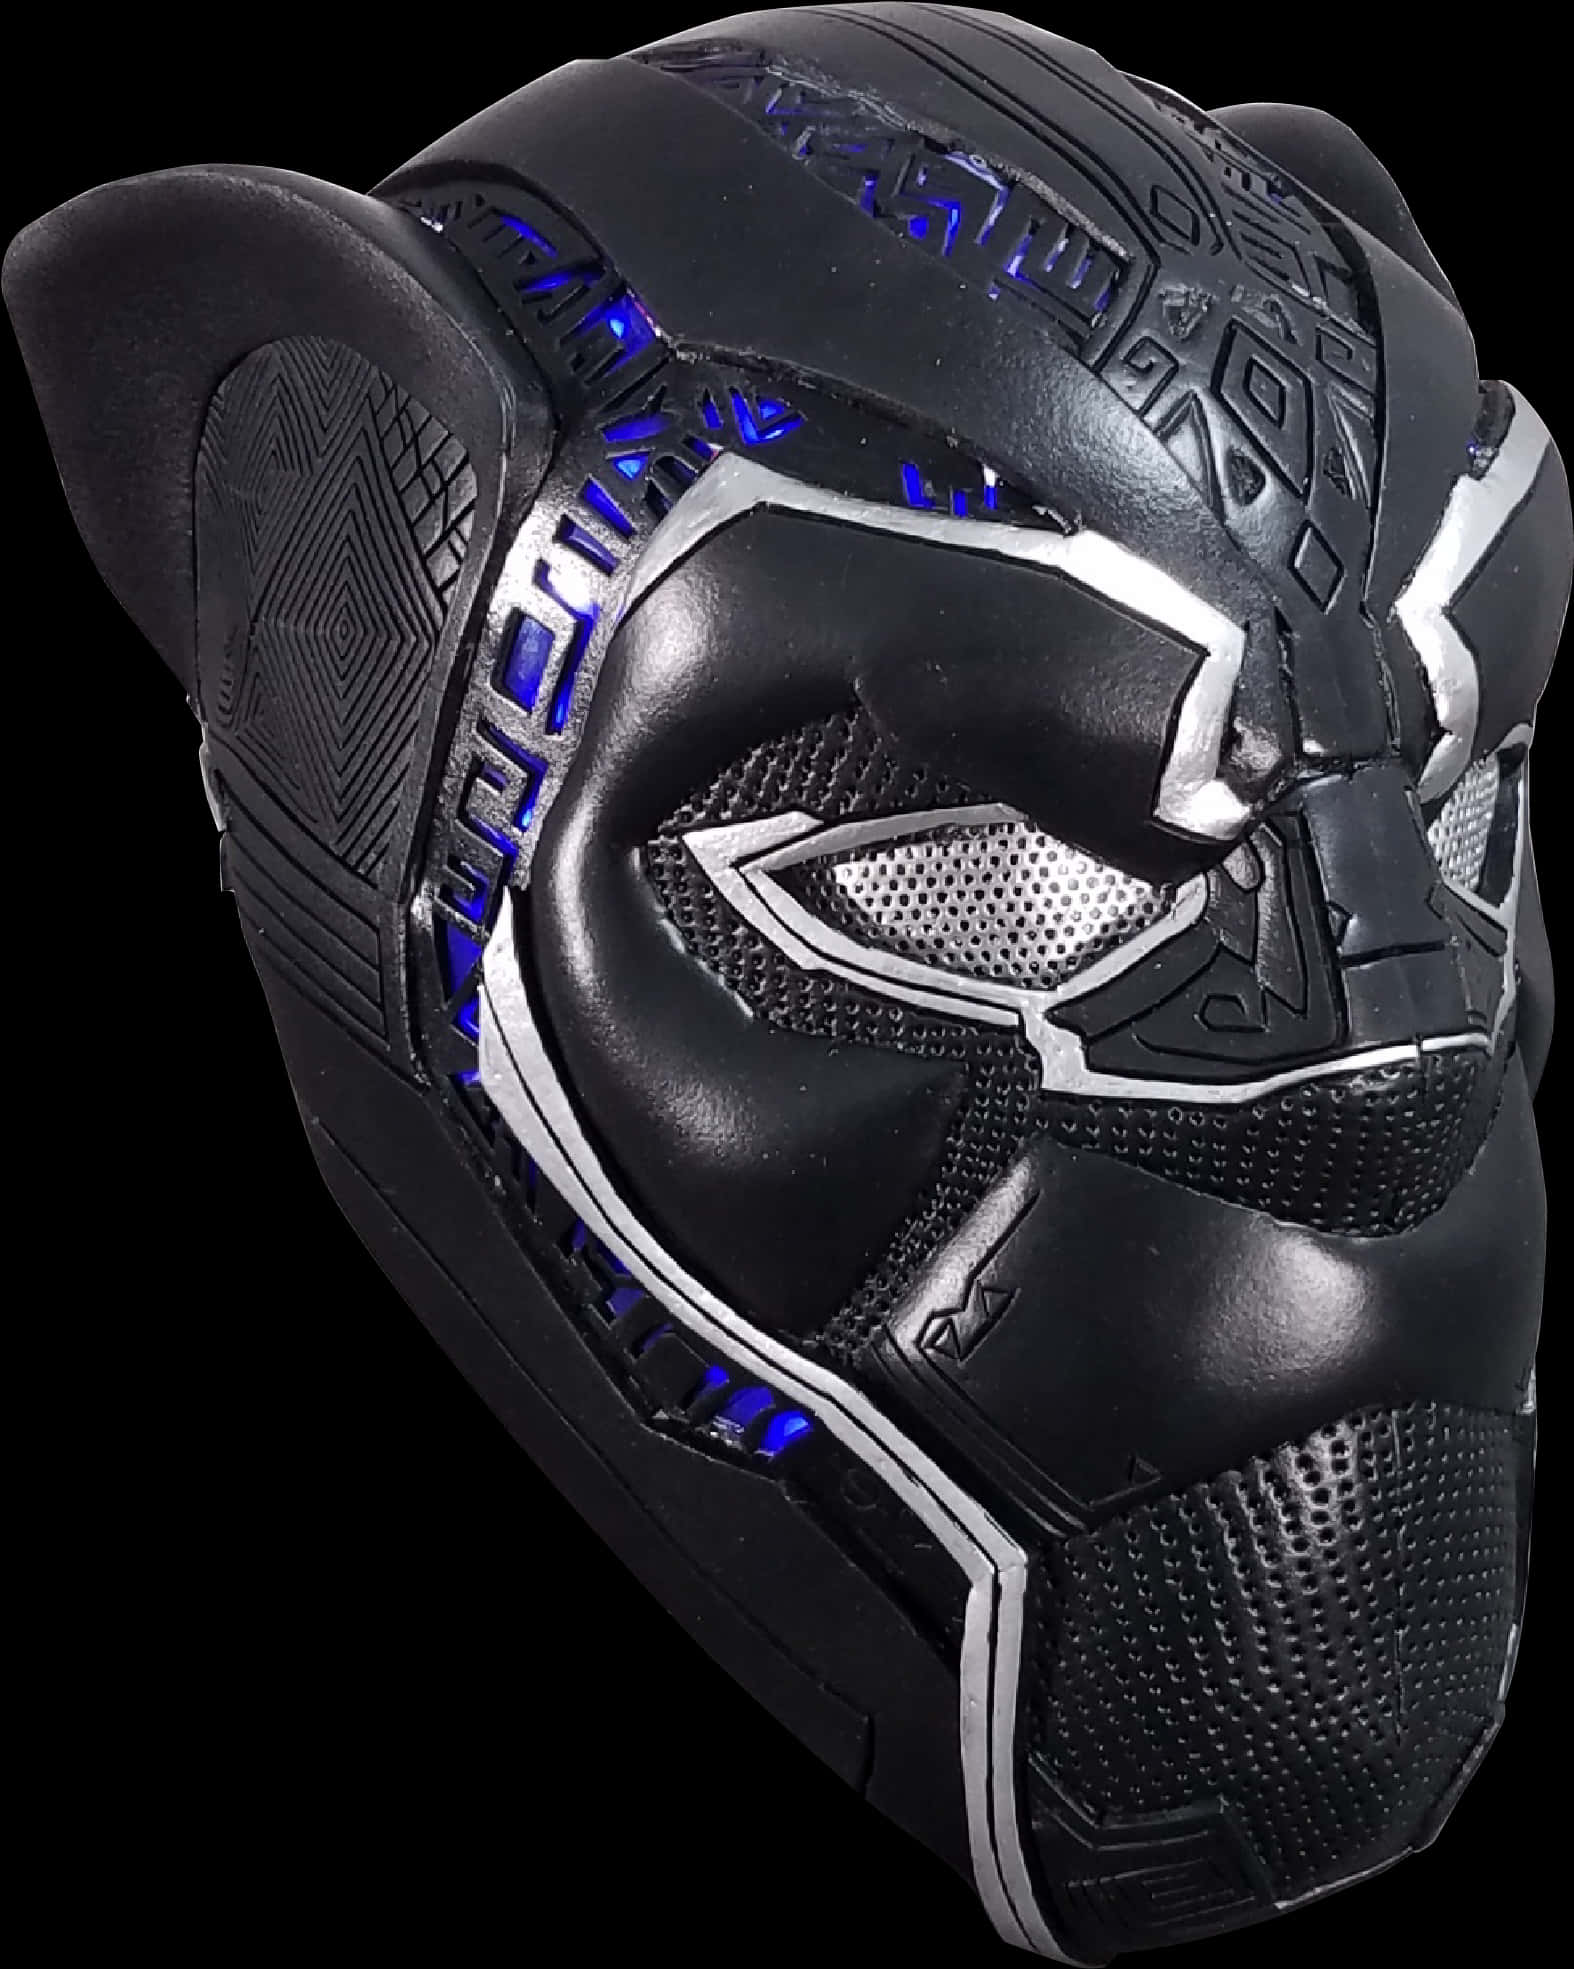 A Black Panther Mask With Blue Lights